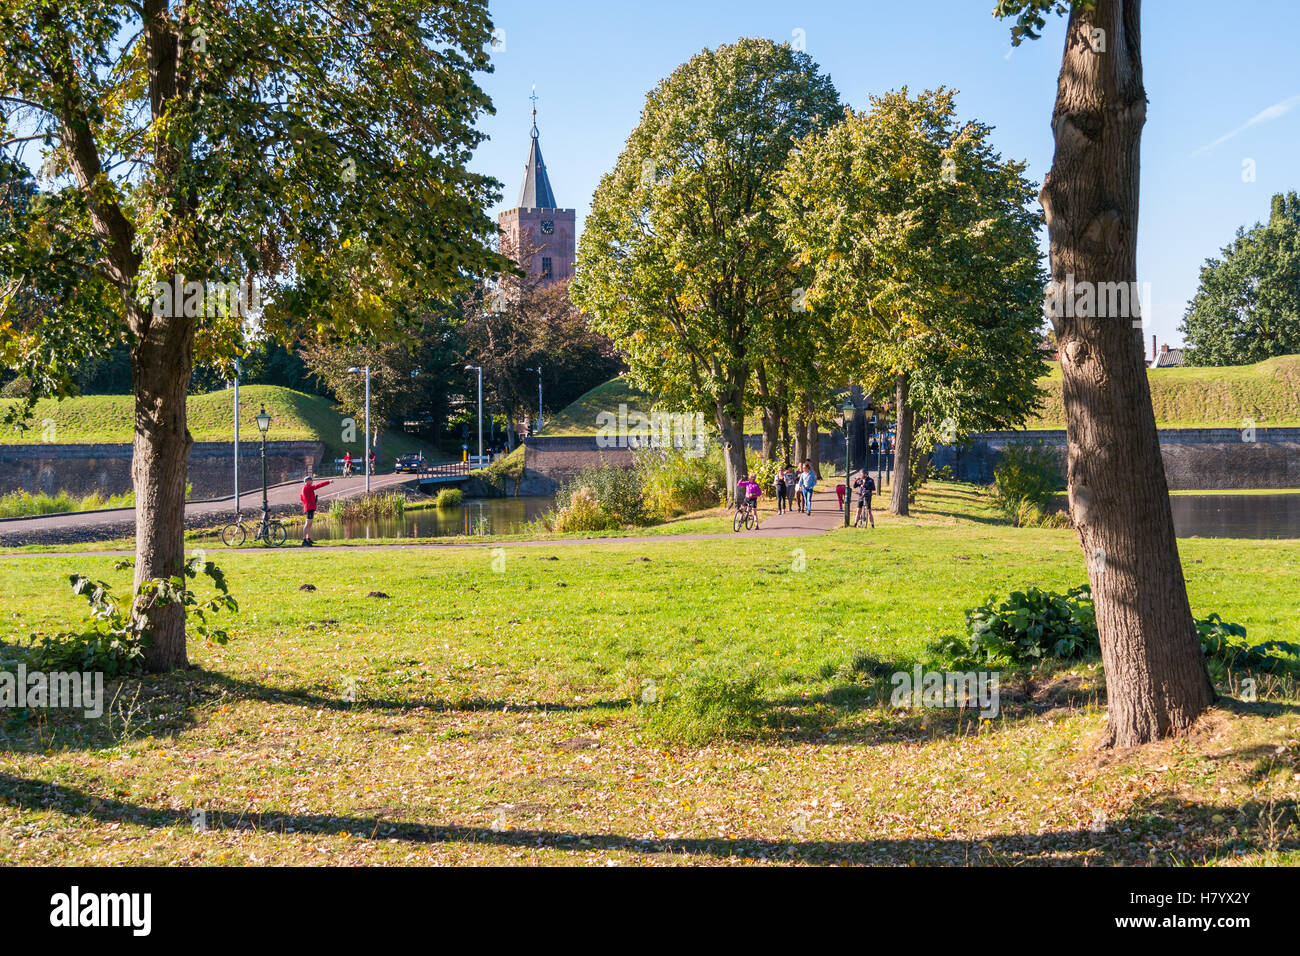 Autumn in old fortified town of Naarden with people, church tower and rampart, Netherlands Stock Photo